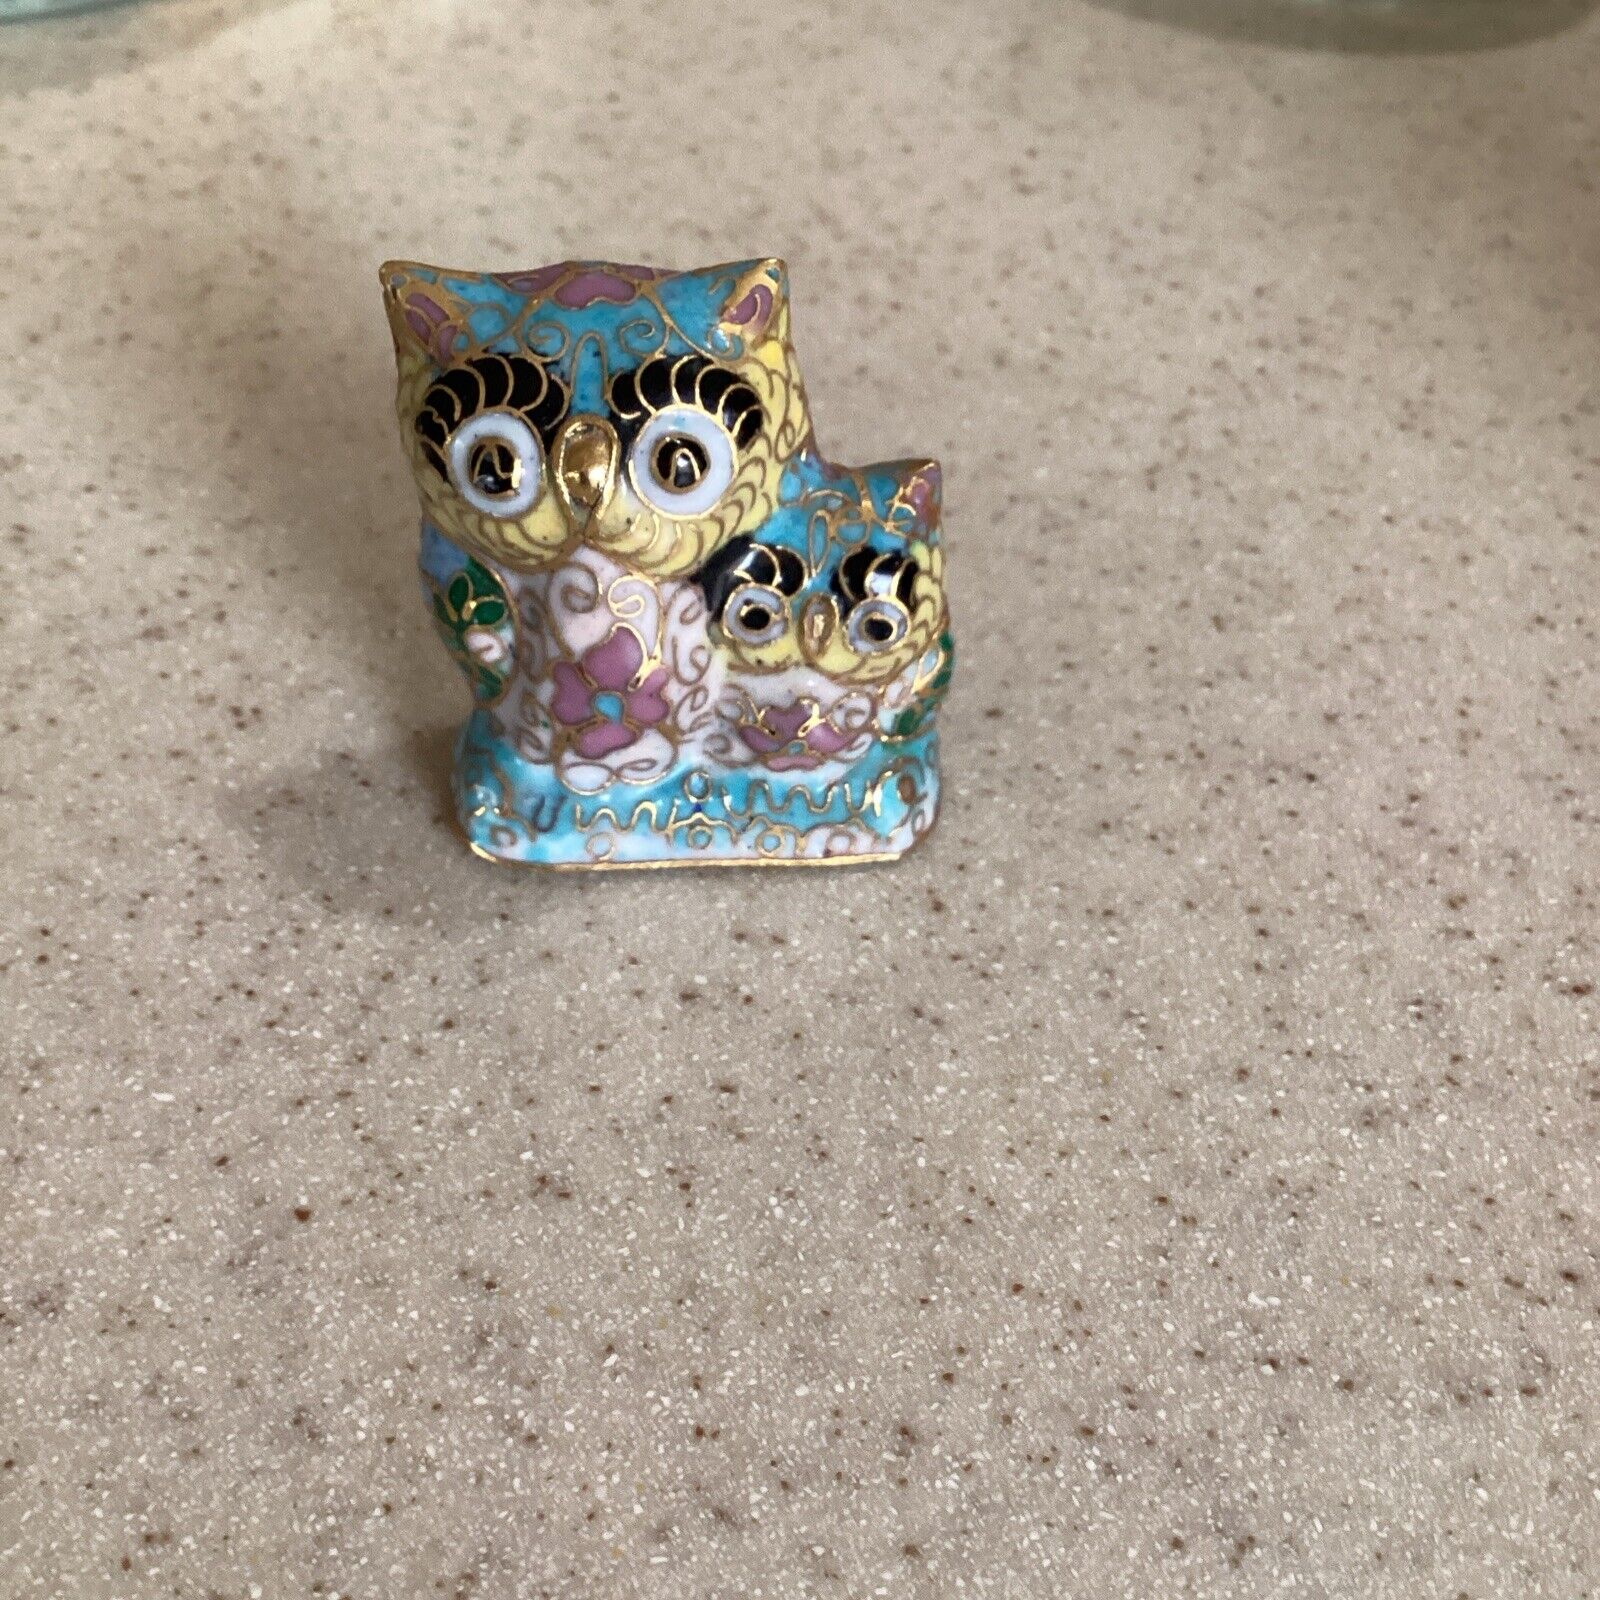 Cloisonné pair of owls one and a half inches tall